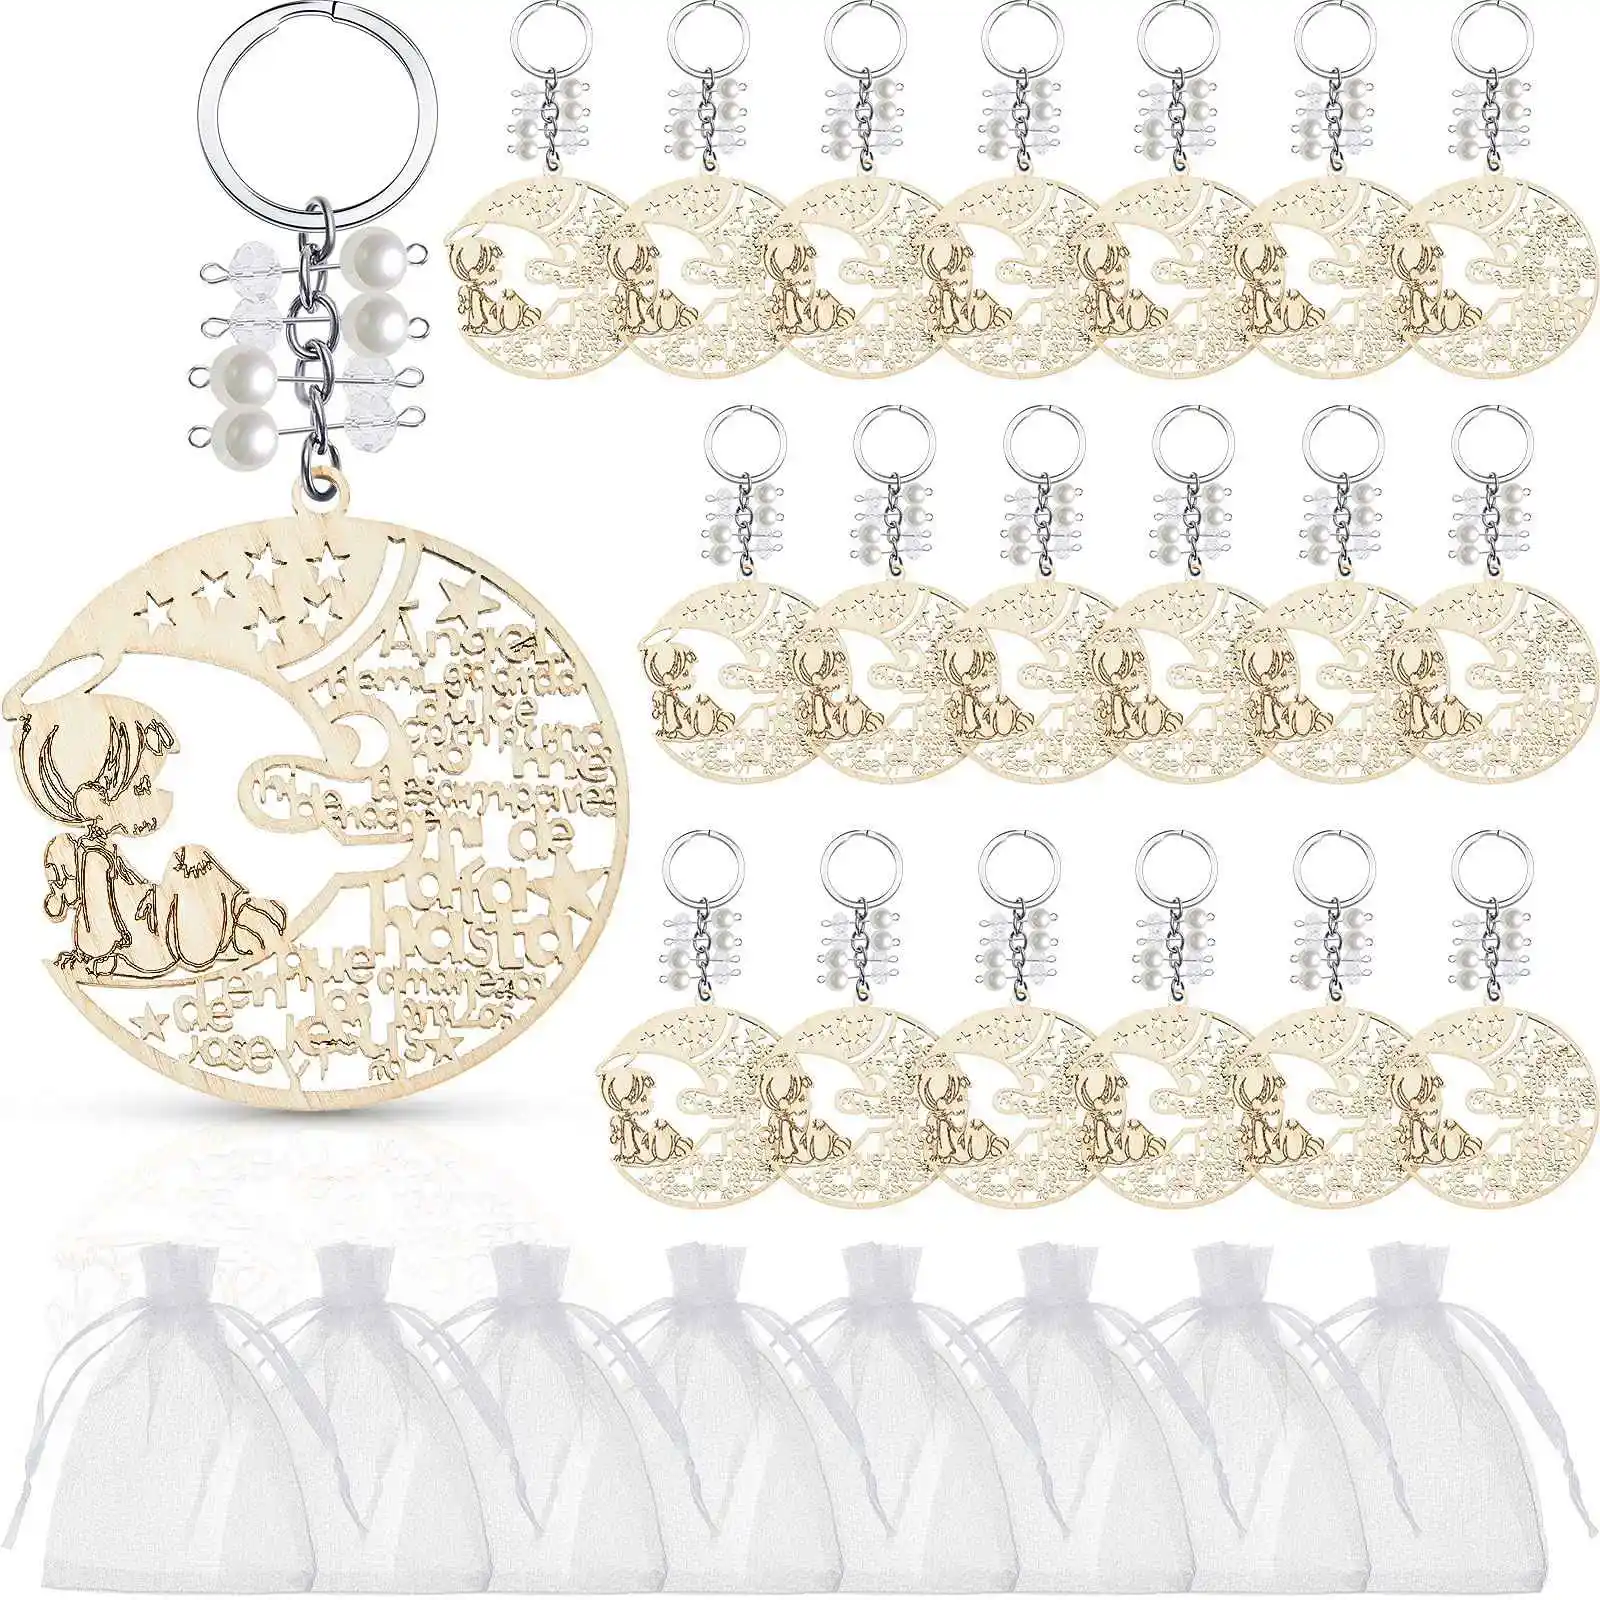 

Baptism Wood Keychains Angle Moon Design Baptism Favors with Organza Bags for Boy Girl Baby Shower Baptism Supplies